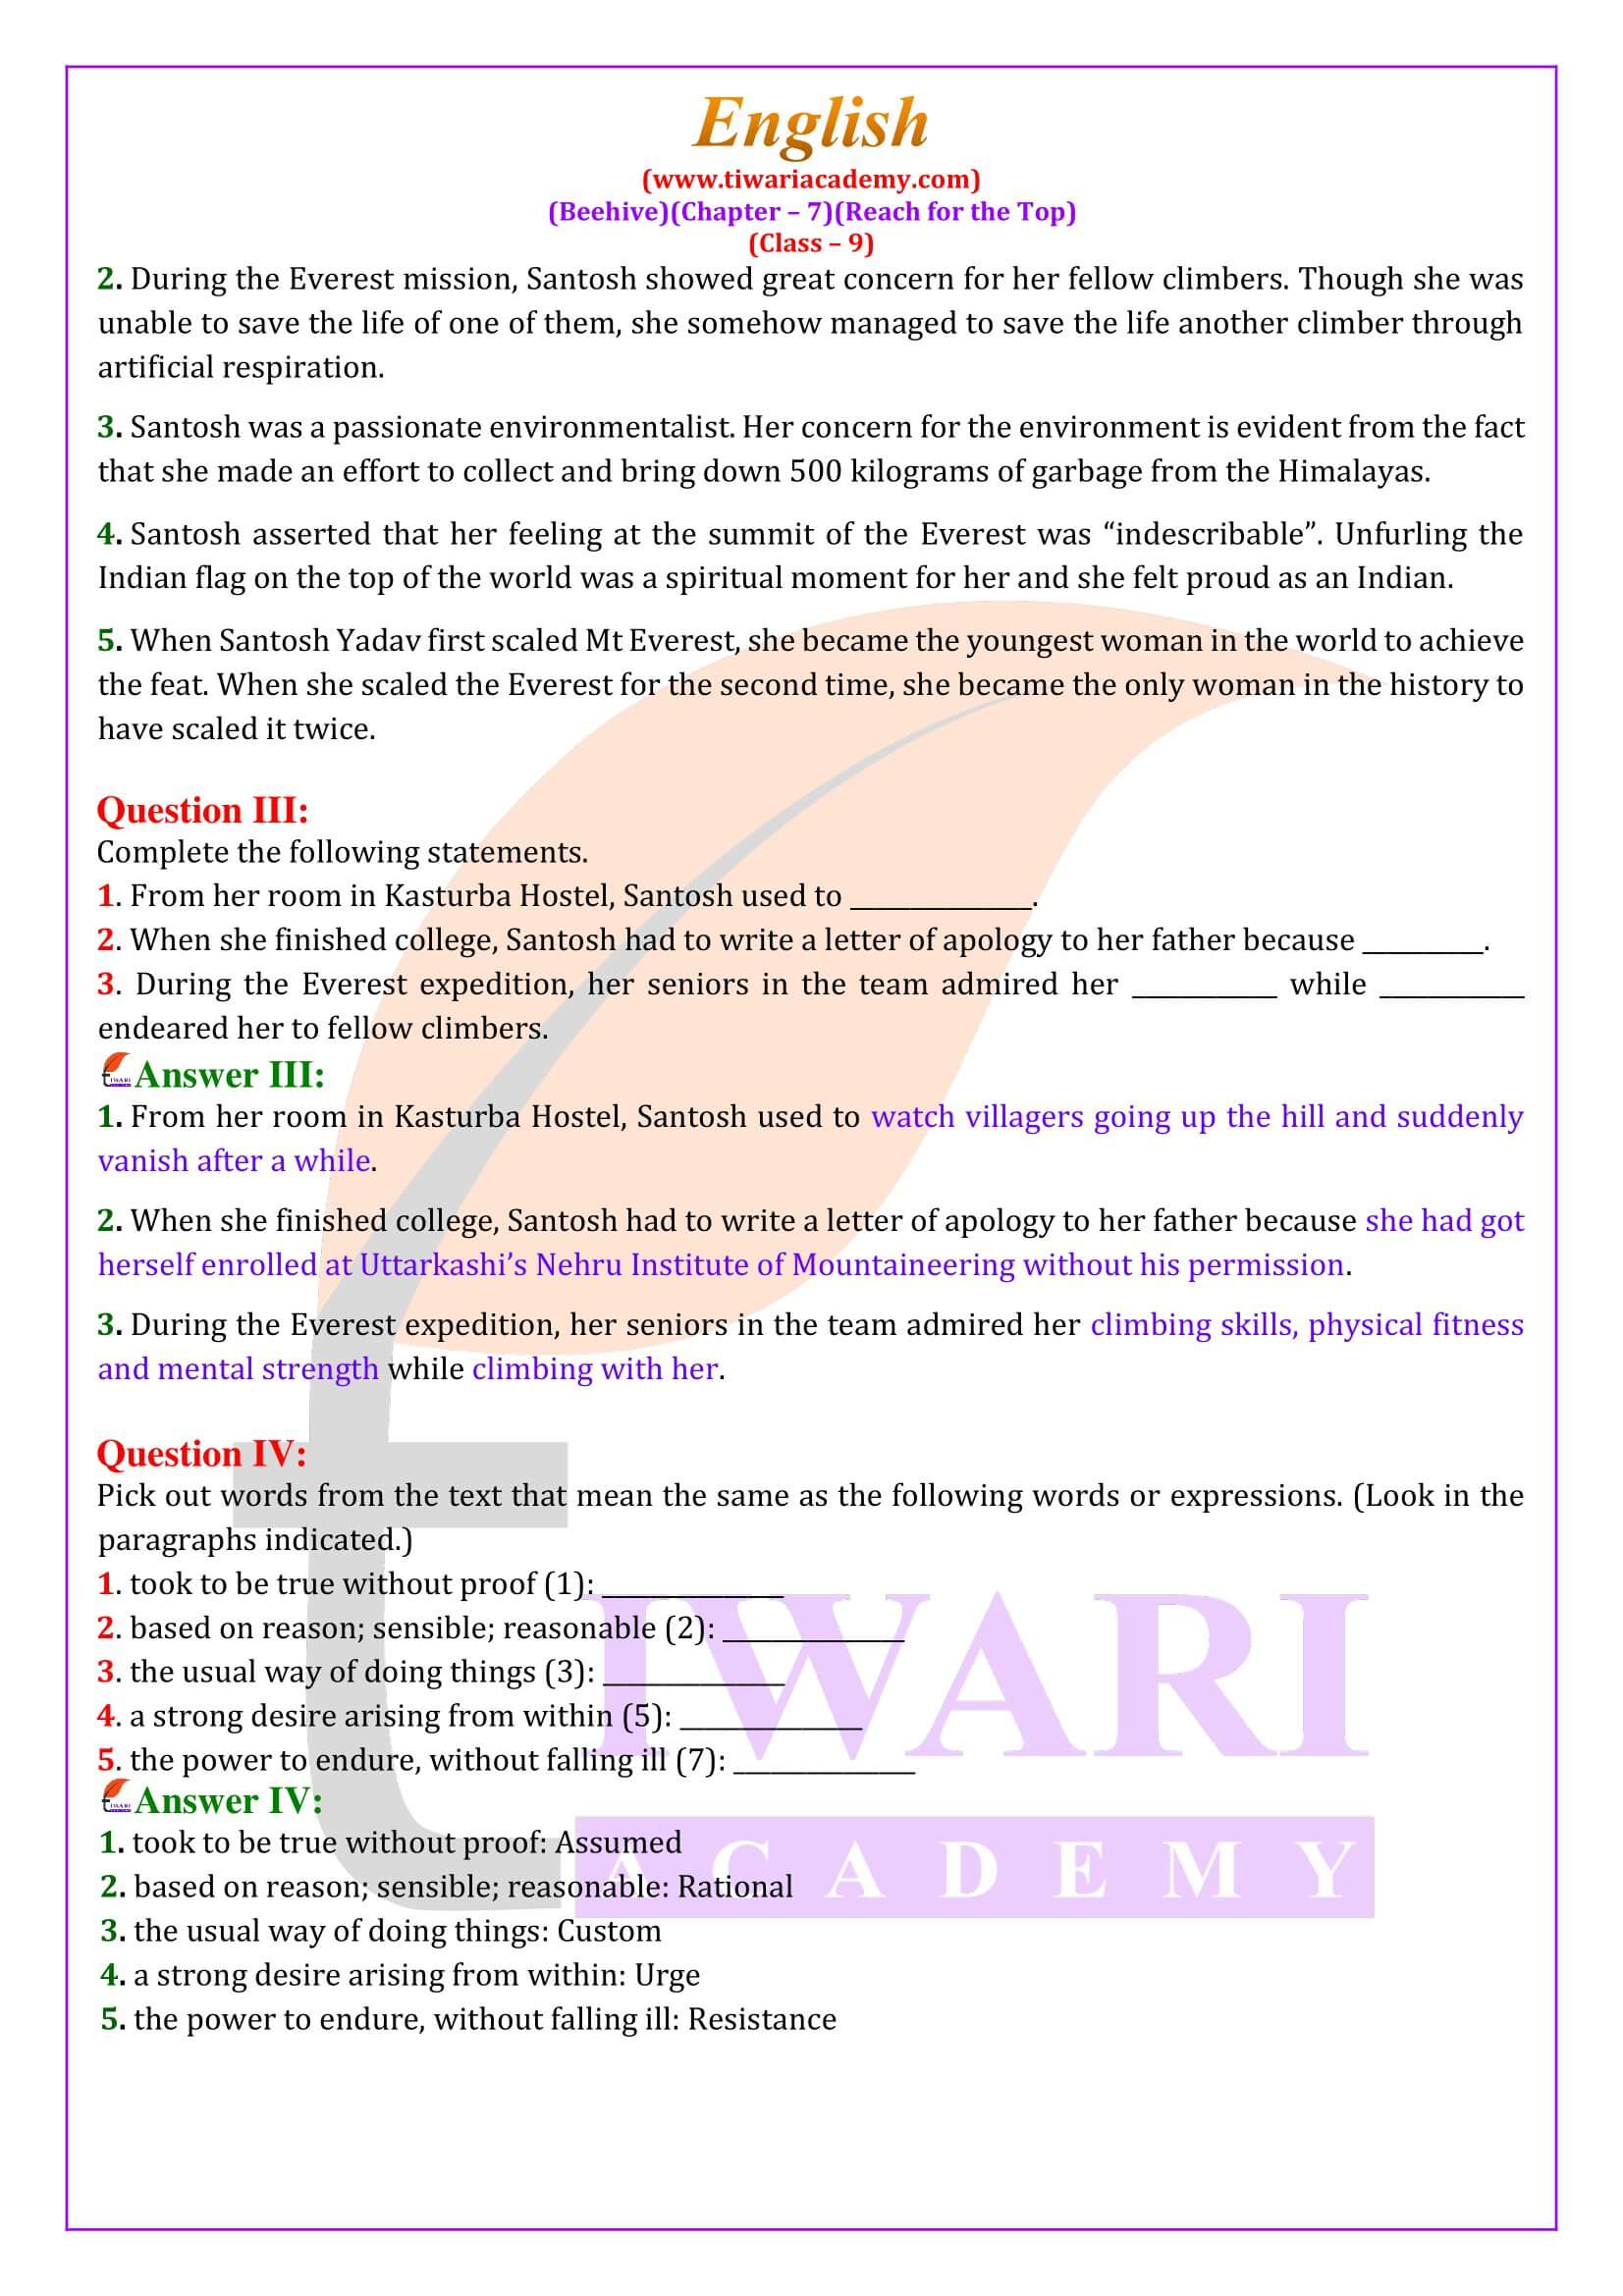 NCERT Solutions for Class 9 English Beehive Chapter 7 Reach for the Top